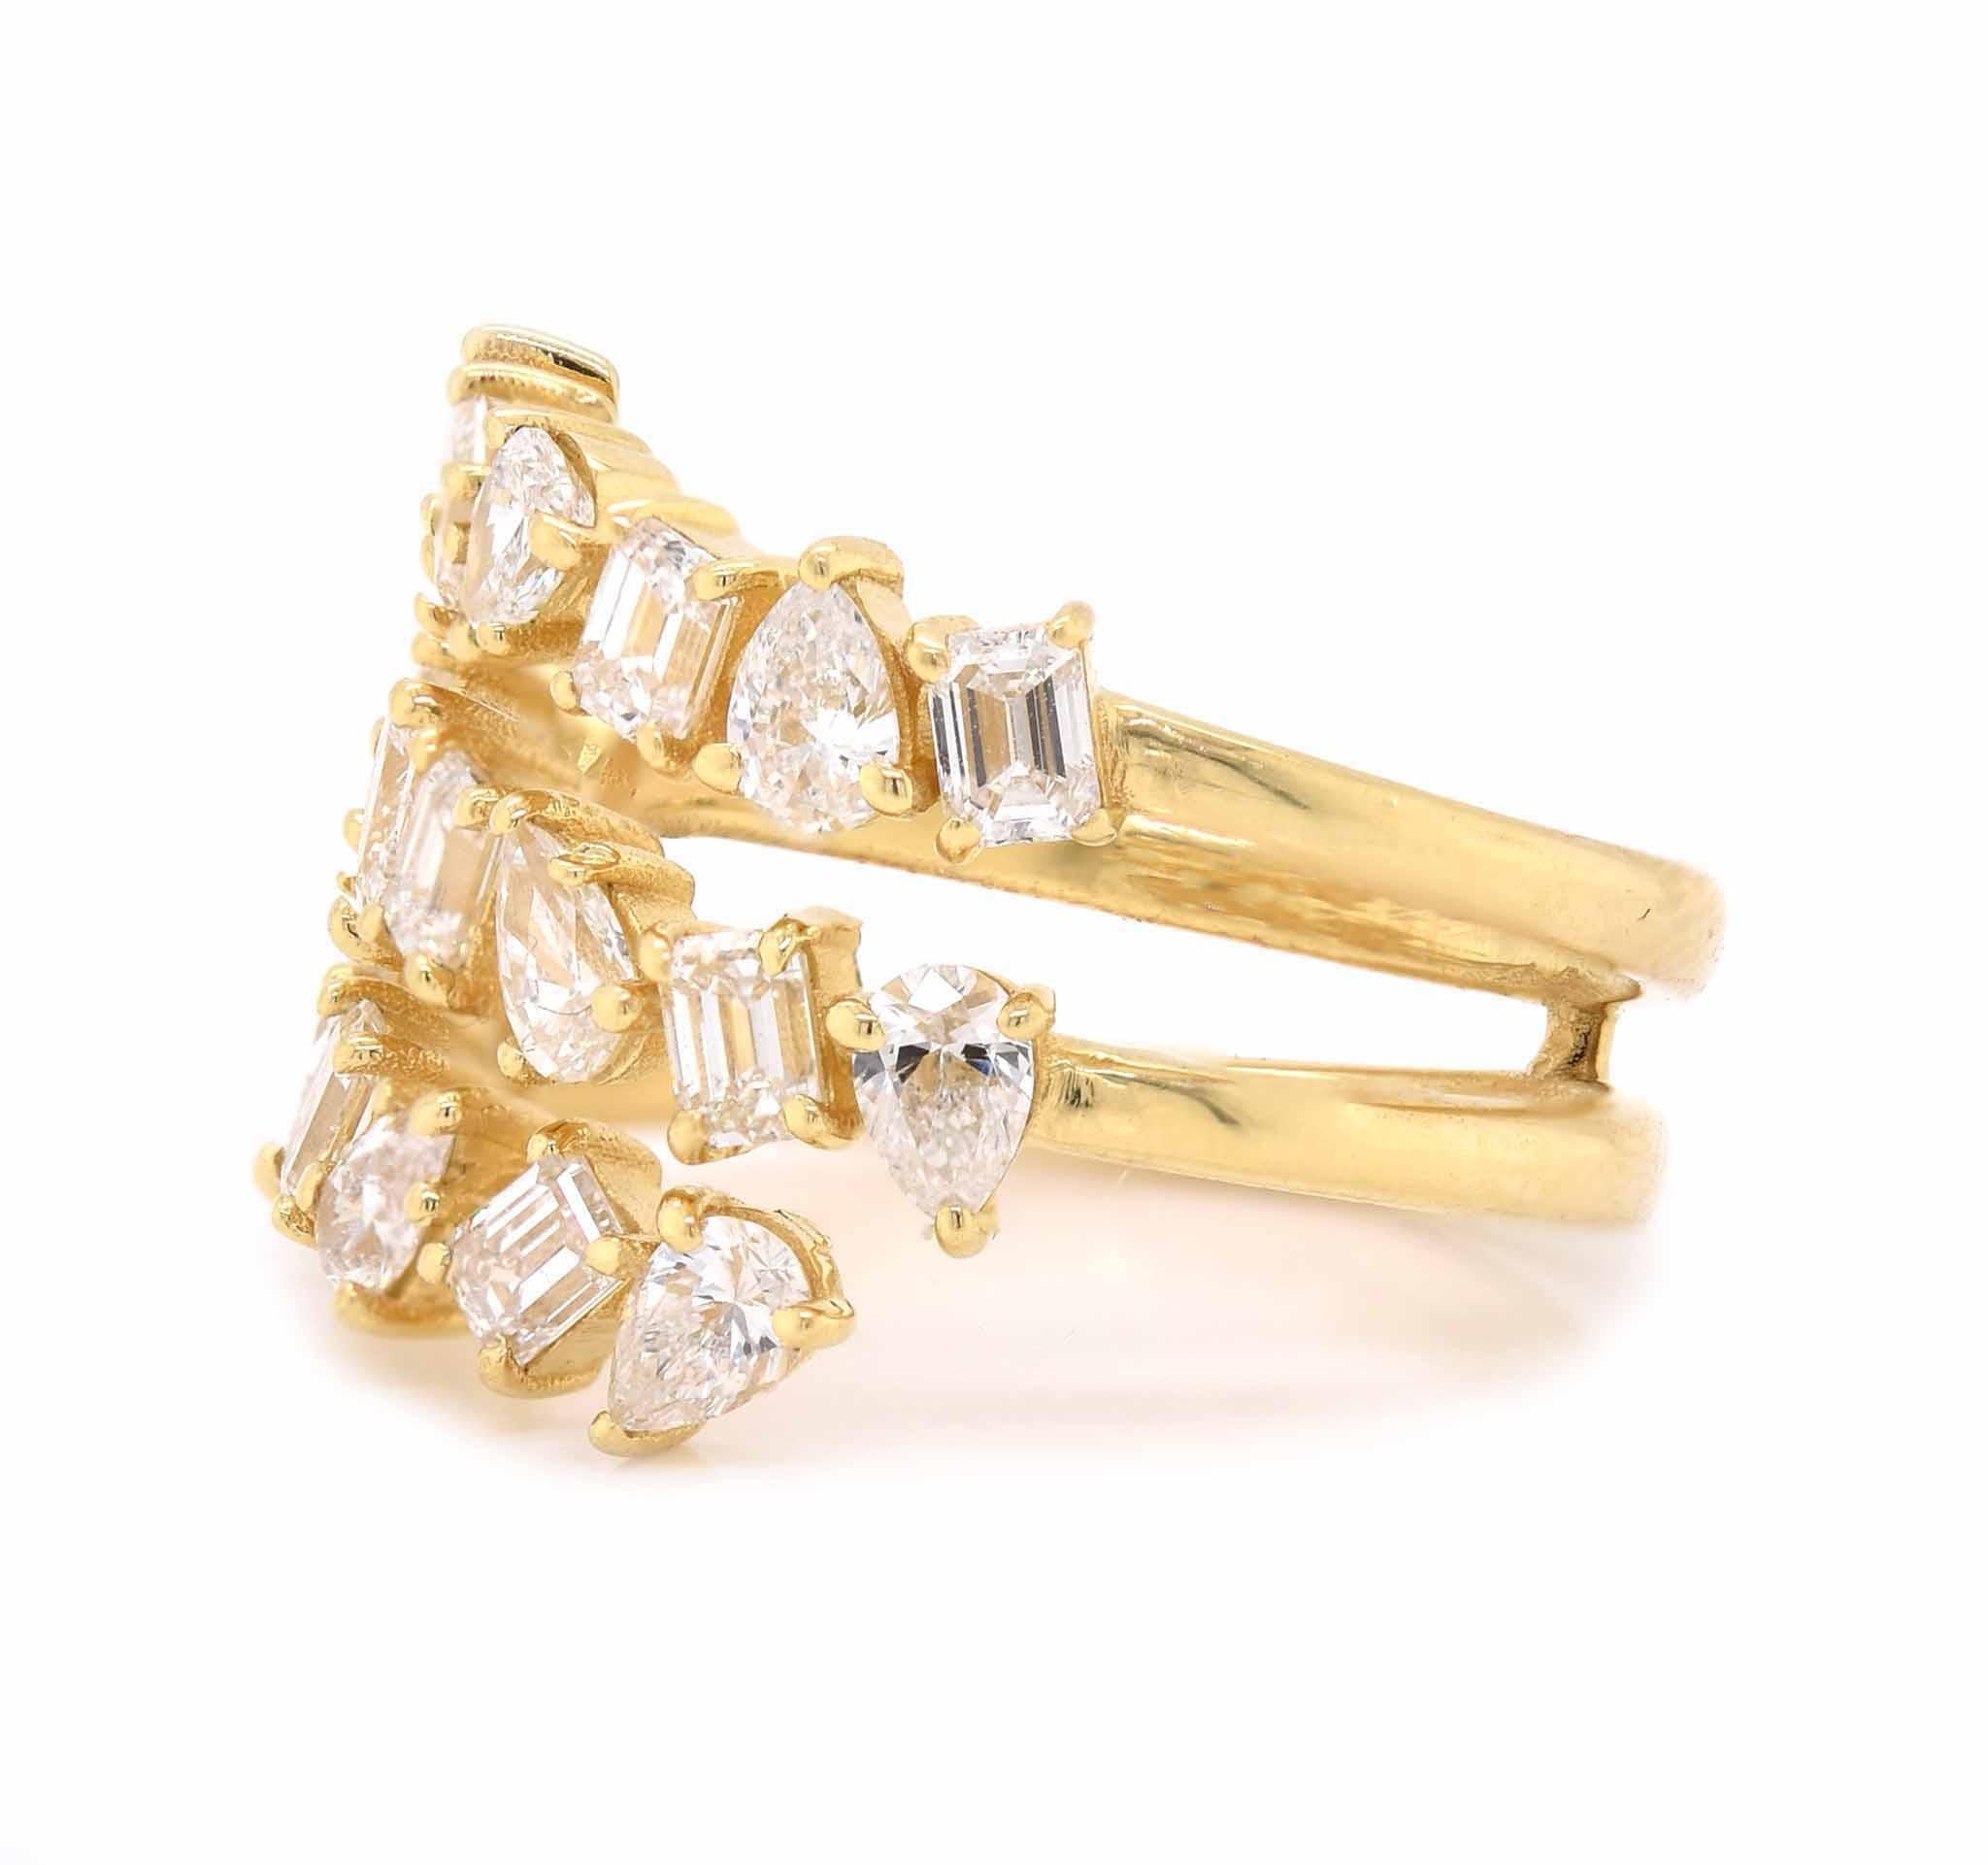 Designer: custom
Material: 18K yellow gold 
Diamonds: 9 baguette cut = 1.25cttw
Color: I
Clarity: VS2
Diamonds: 10 pear cut = 1.50cttw
Color: H/I
Clarity: VS2
Ring size: 6.75 (please allow two additional shipping days for sizing requests)
Weight: 